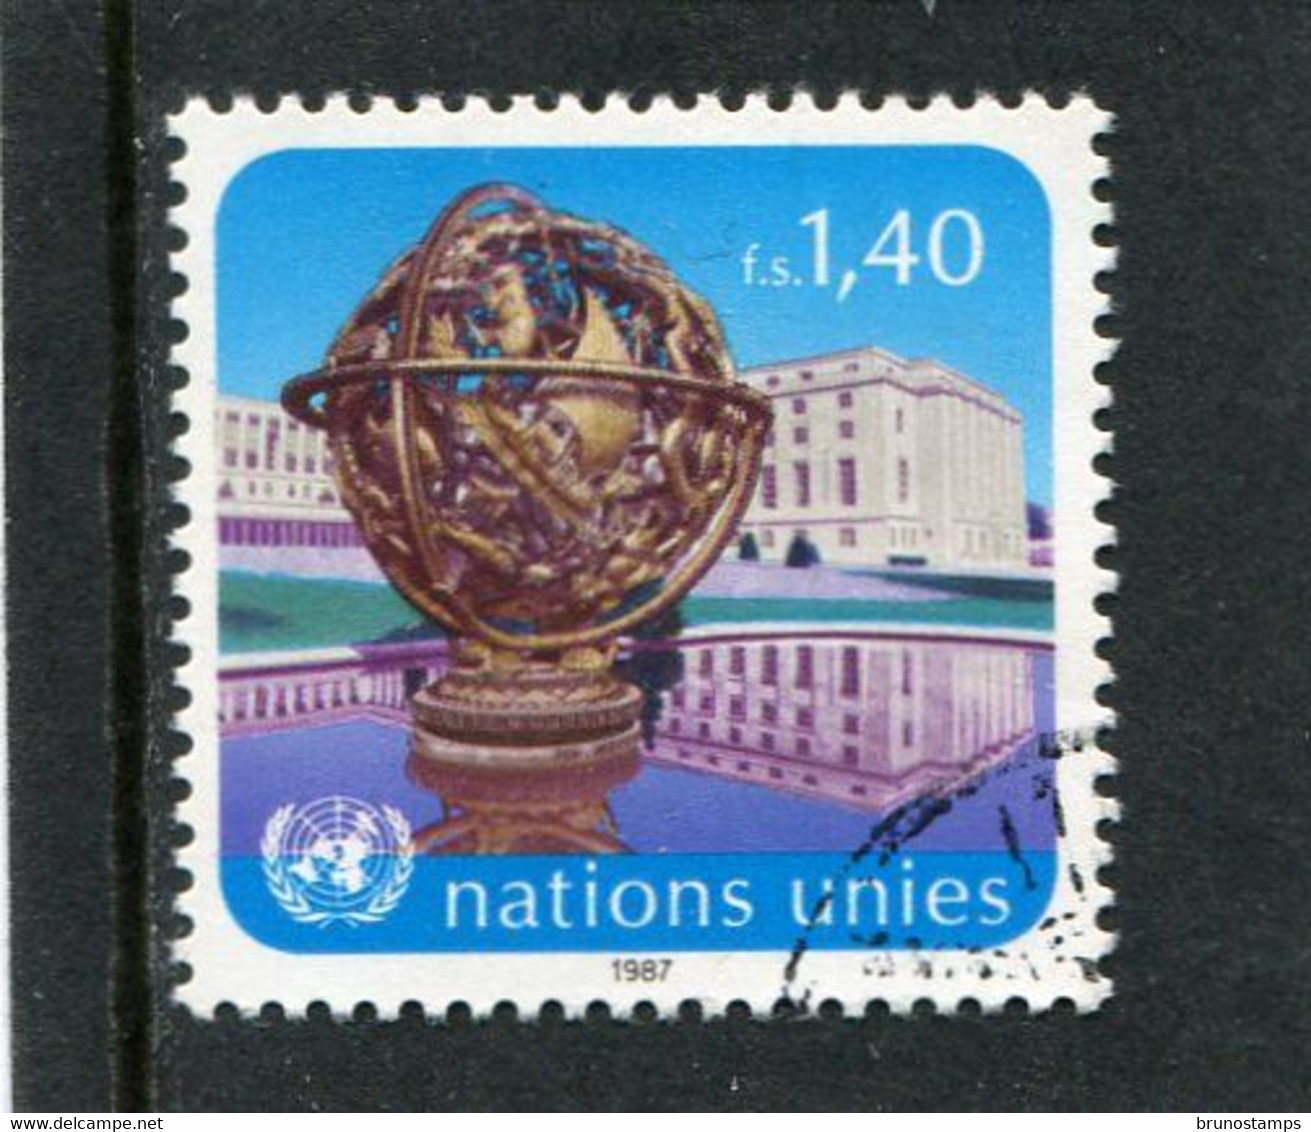 UNITED NATIONS - GENEVE  -  1987  1.40 F.  DEFINITIVE  FINE USED - Oblitérés